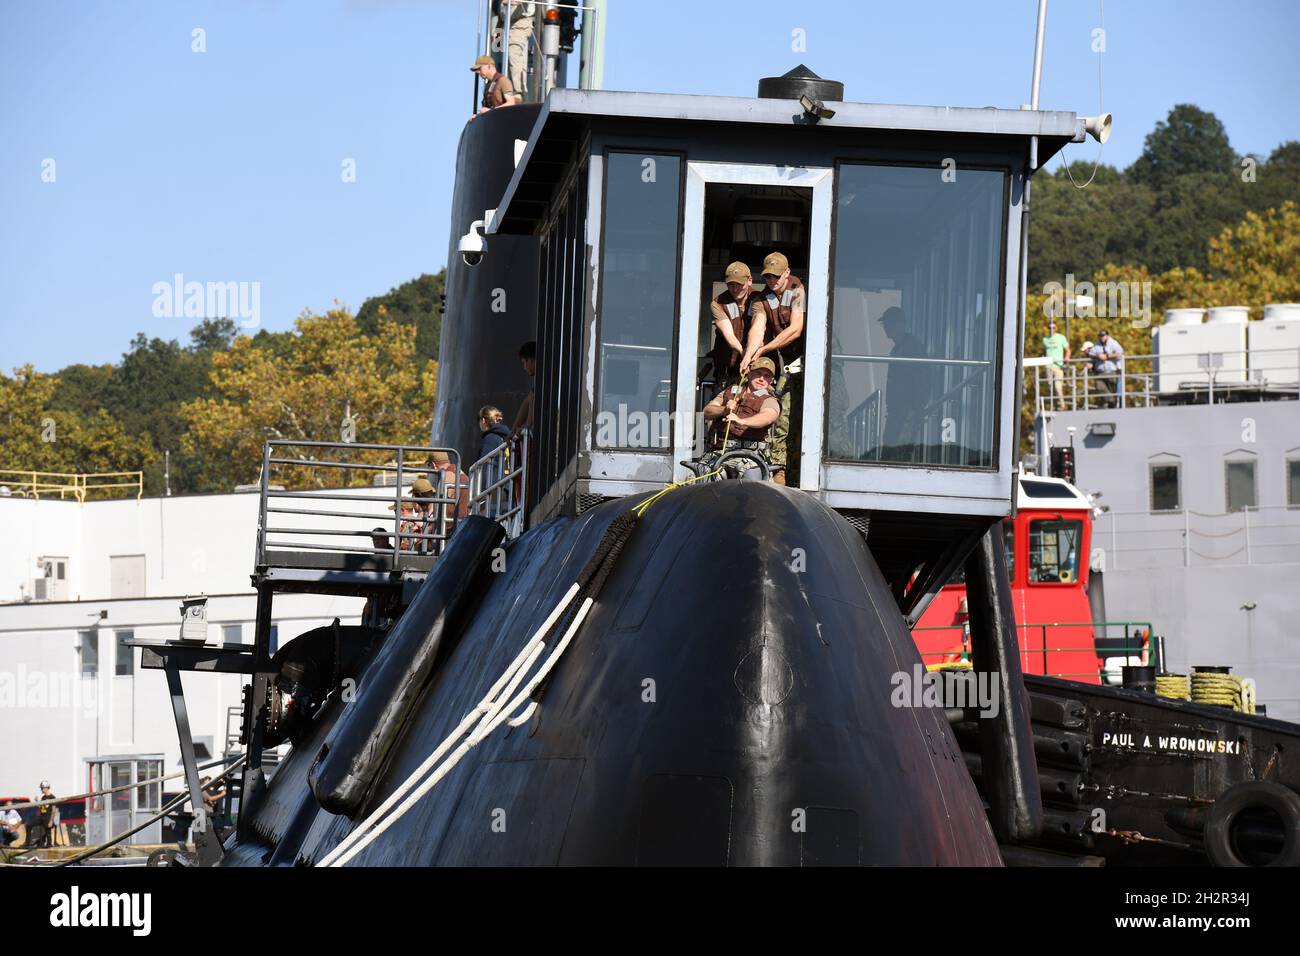 Groton, United States. 15 October, 2021. U.S. Navy sailors pull a mooring line from the pier to the Historic Ship USS Nautilus as the ship prepares to be moored at Submarine Base New London October 15, 2021 in Groton, Connecticut. Nautilus, was the first nuclear-powered submarine and current Submarine Force Museum centerpiece, and will begin an $36-million dollar preservation project. Credit: CPO Joshua Karsten/U.S. Navy/Alamy Live News Stock Photo